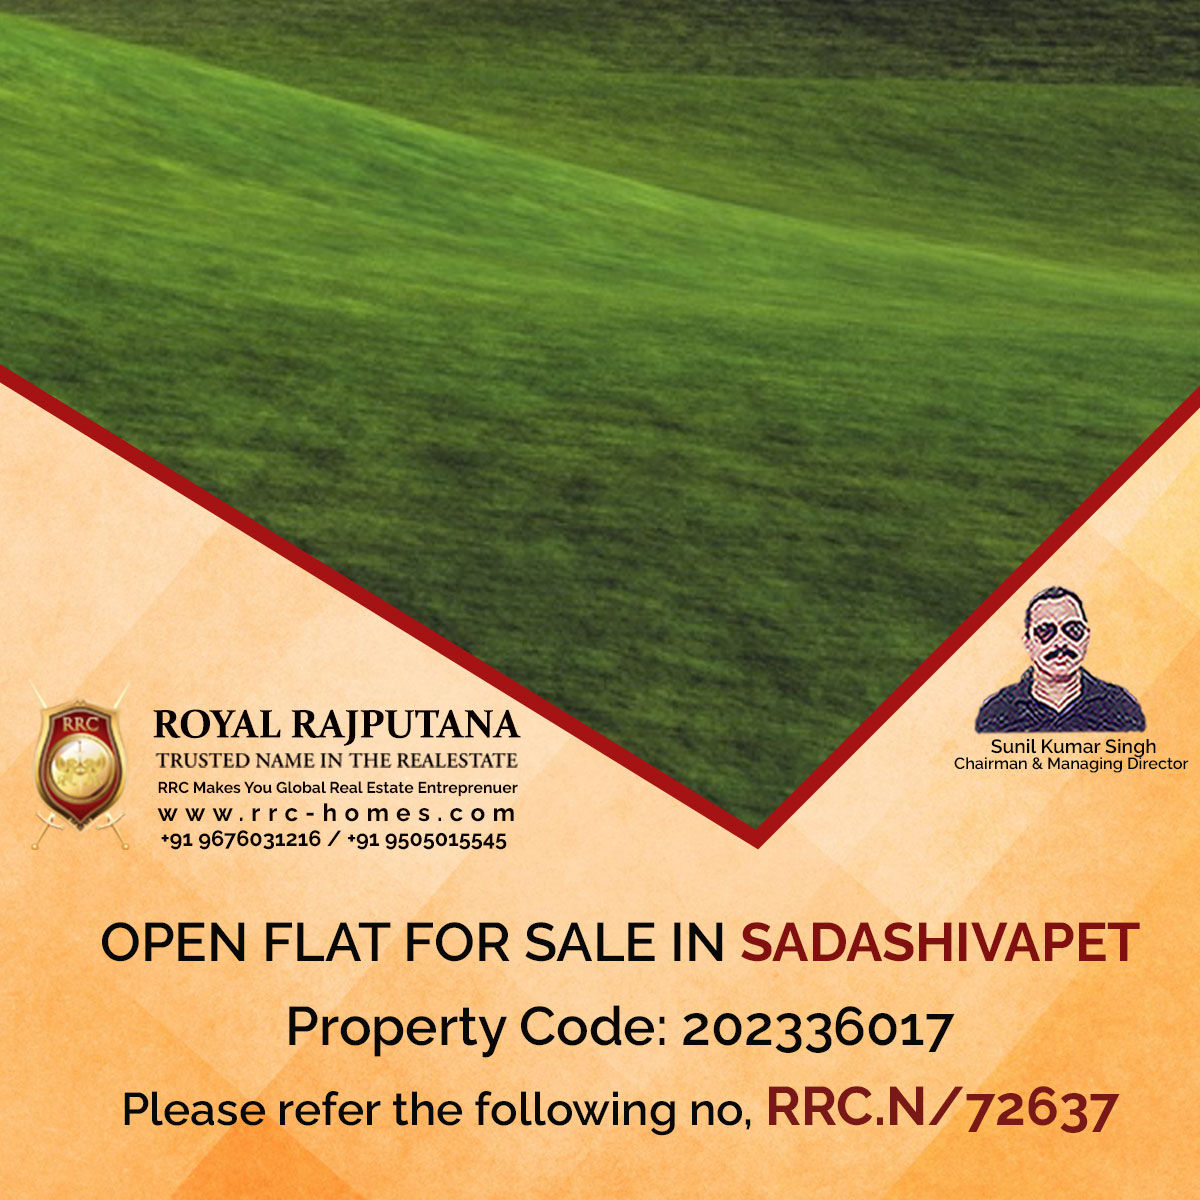 OPEN FLAT FOR SALE IN SADASHIVAPET
Property Code: 202336017
Please refer the following no, RRC.N/72637 

#royalrajputana #royalrajputanahomes #rrc #rrchomes #sale #lease #rent #propertyservices #properties #aboutrrc #mortageservices #sadashivapet #property #sale #RRC